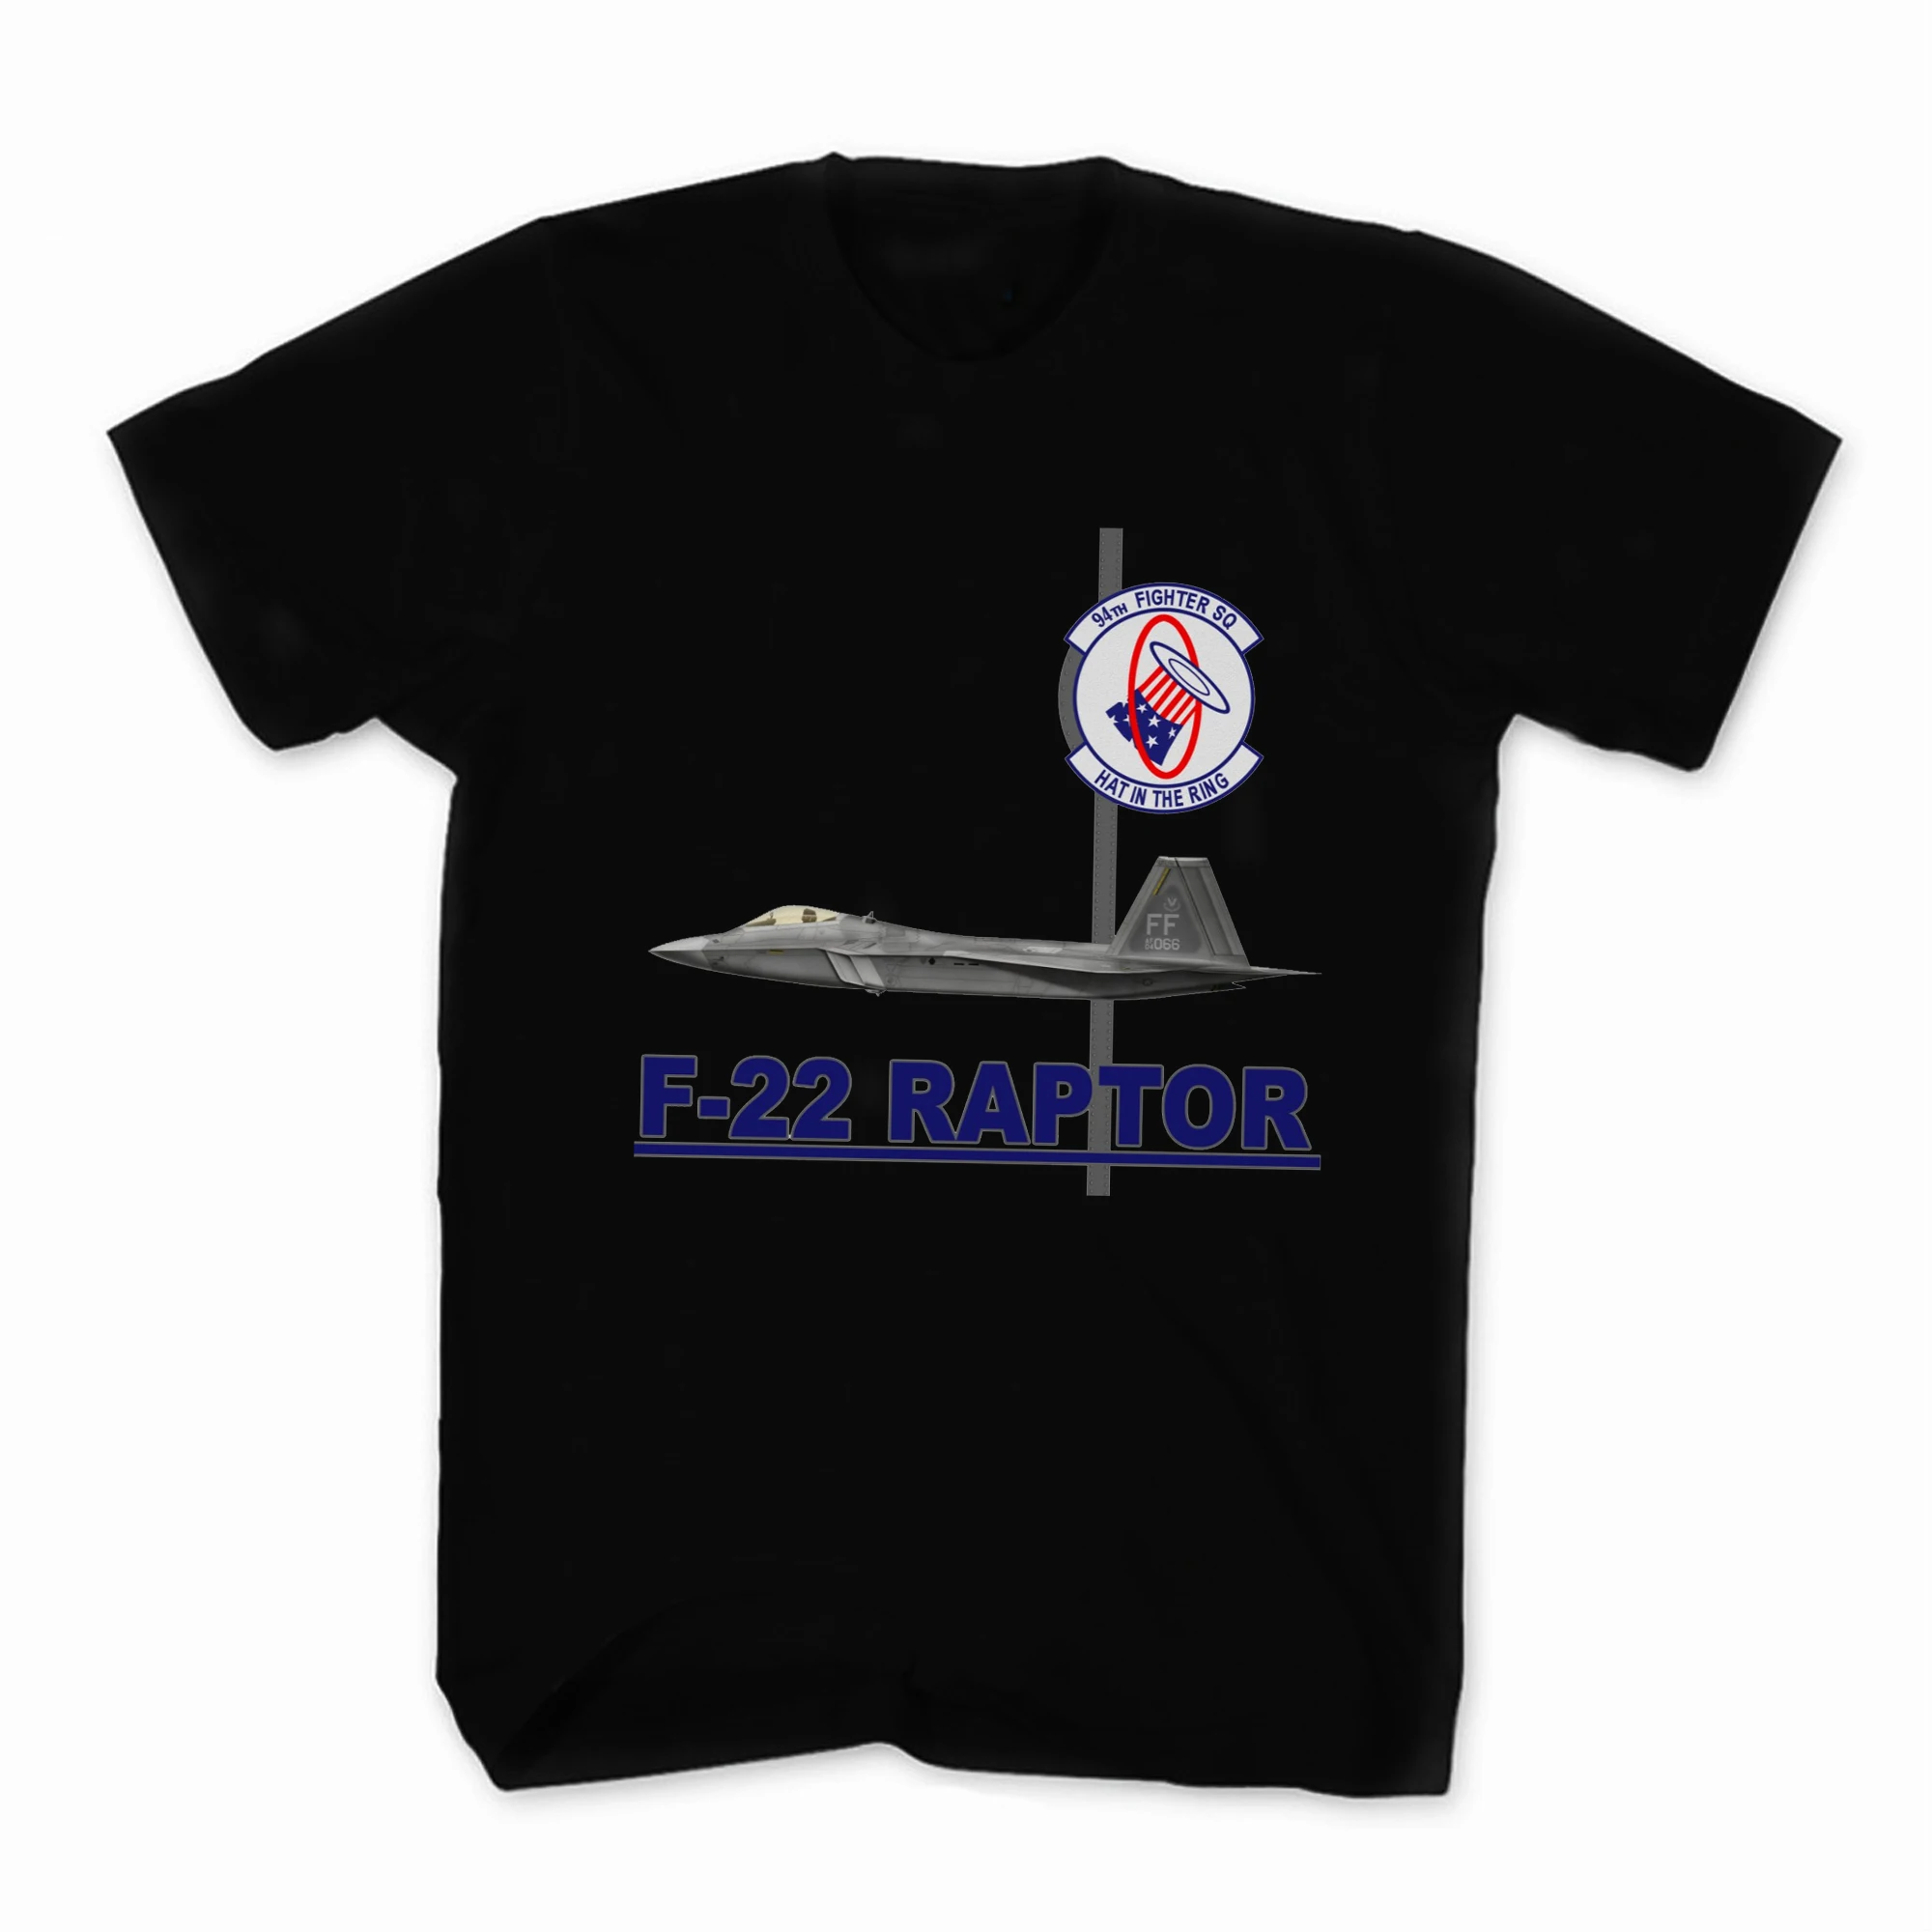 

US Air Force 94th Fighter Squadron F-22 Raptor T-Shirt. Summer Cotton O-Neck Short Sleeve Mens T Shirt New S-3XL